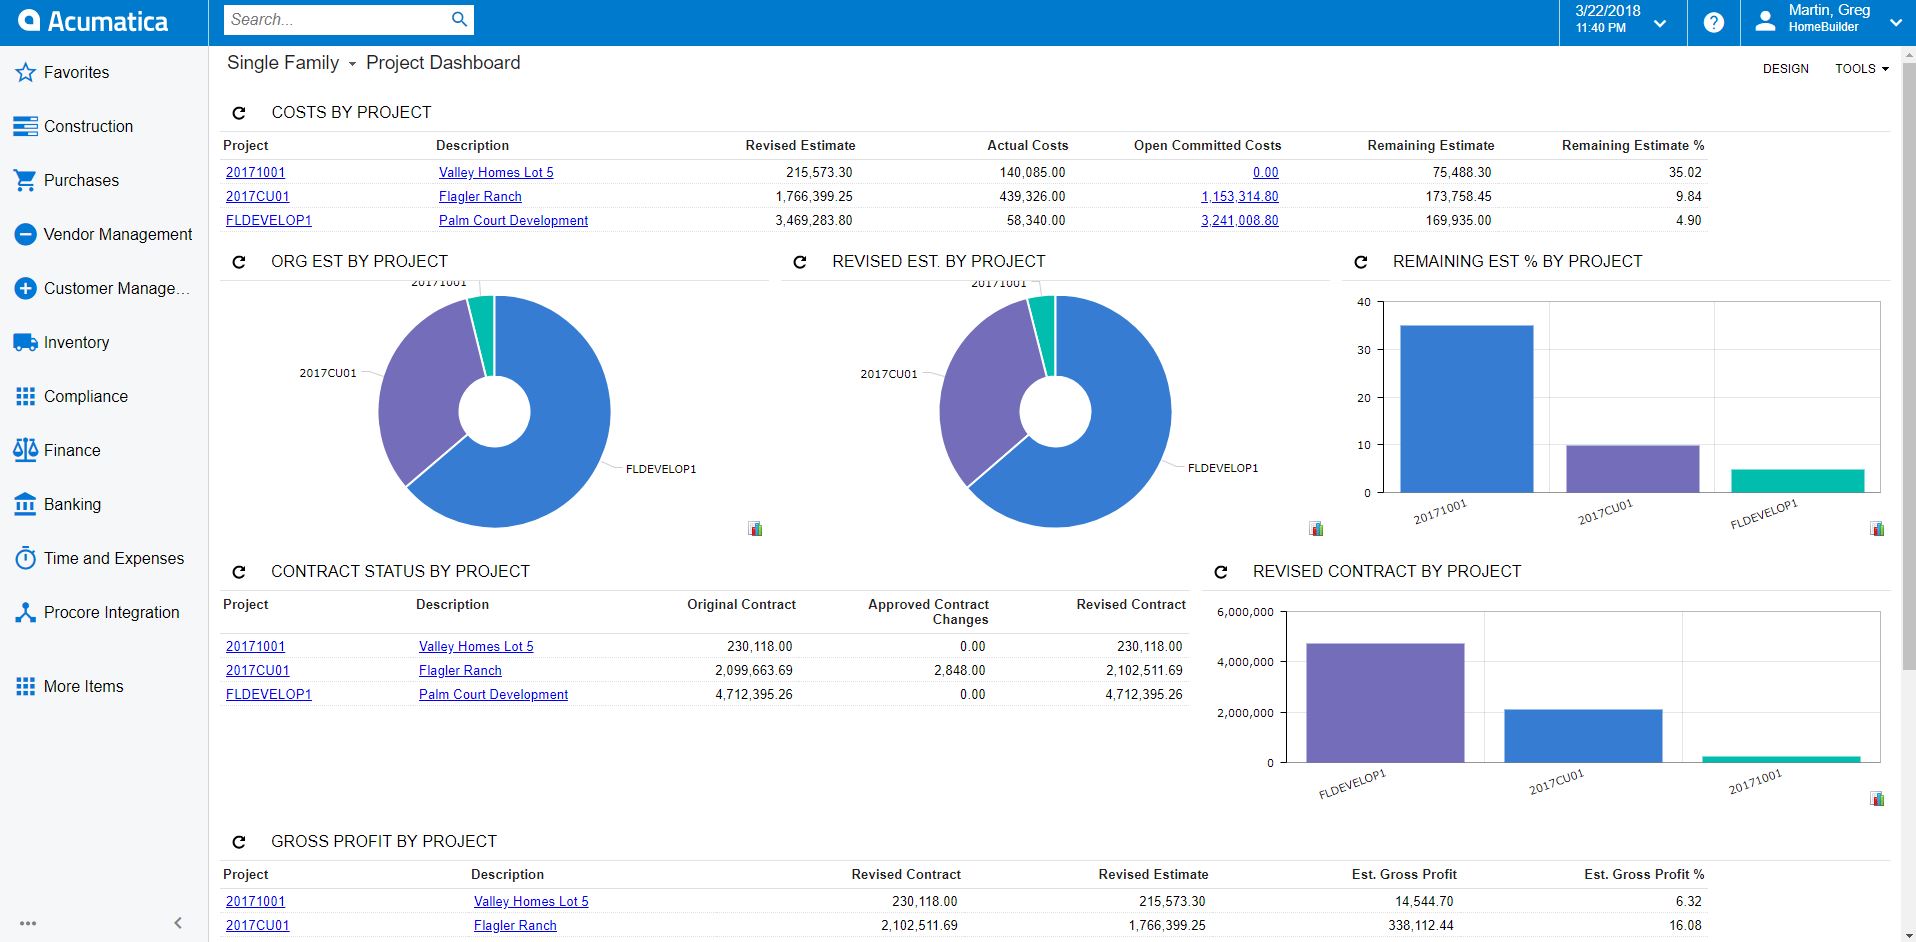 acumatica construction management software dashboard cloud project accounting